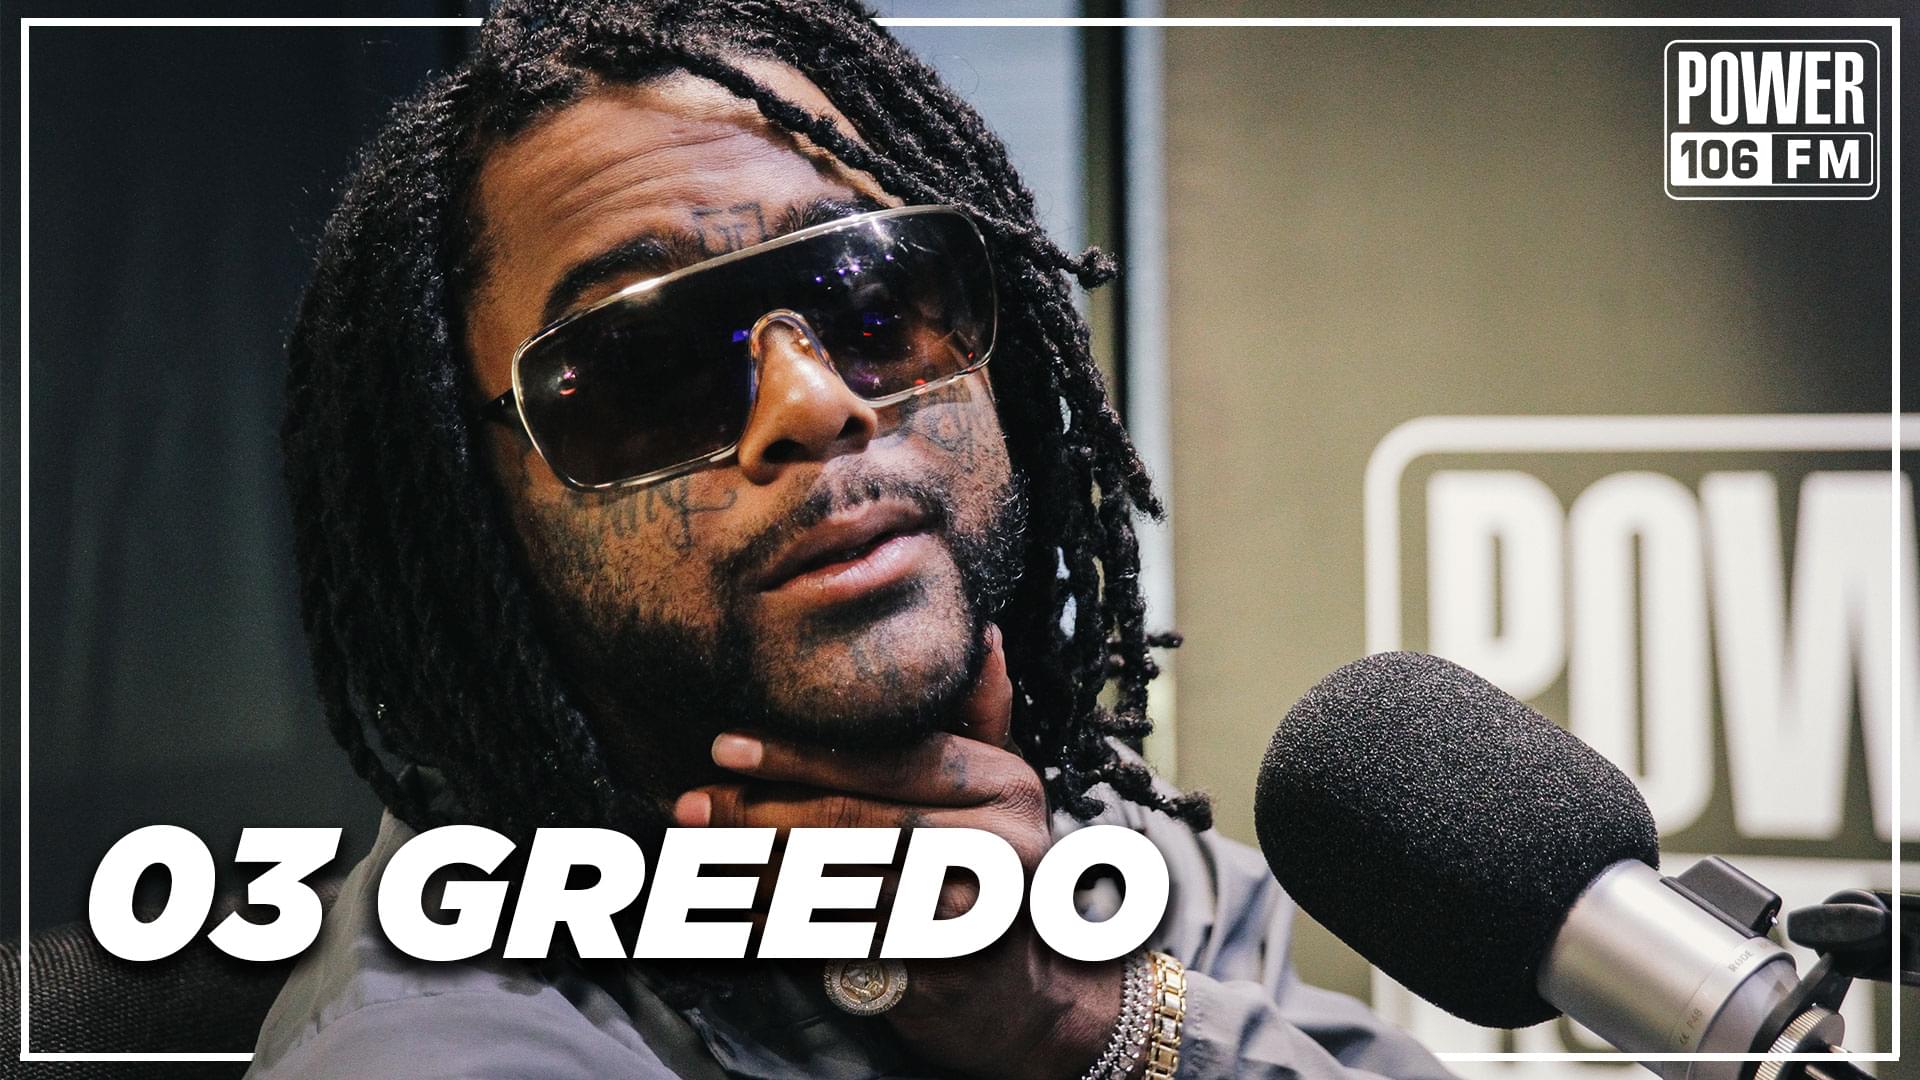 03 Greedo Talks 30 Upcoming Projects, “God Level” Album, Shouts Out Beyonce & Jay Z [WATCH]